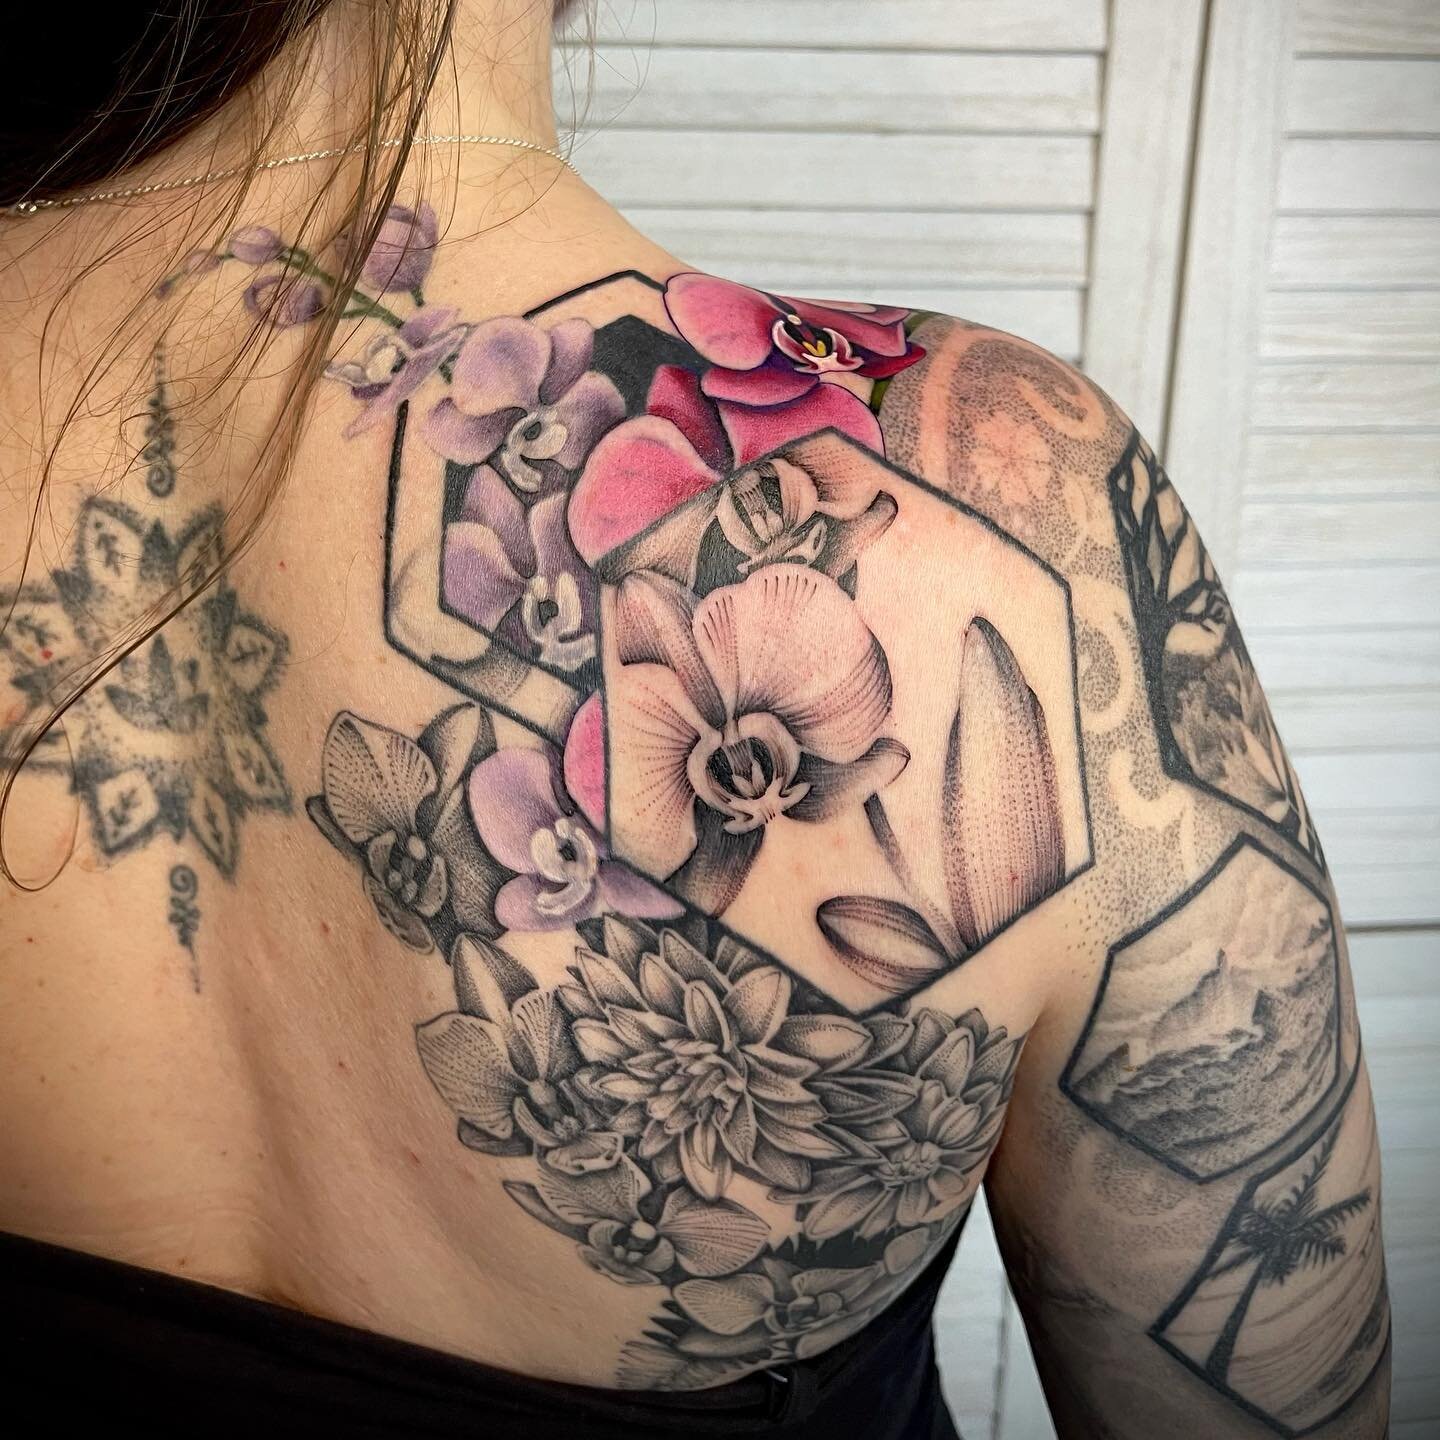 @chitownsam &mdash; it&rsquo;s been such a journey! What started off as a small walk-in blossomed into a full sleeve! Here are some of my favorite snippets.
👉 Swipe to see more angles on this piece 👉
🌸🌸🌸
&hellip;
&hellip;
&hellip;
&hellip;
&hell